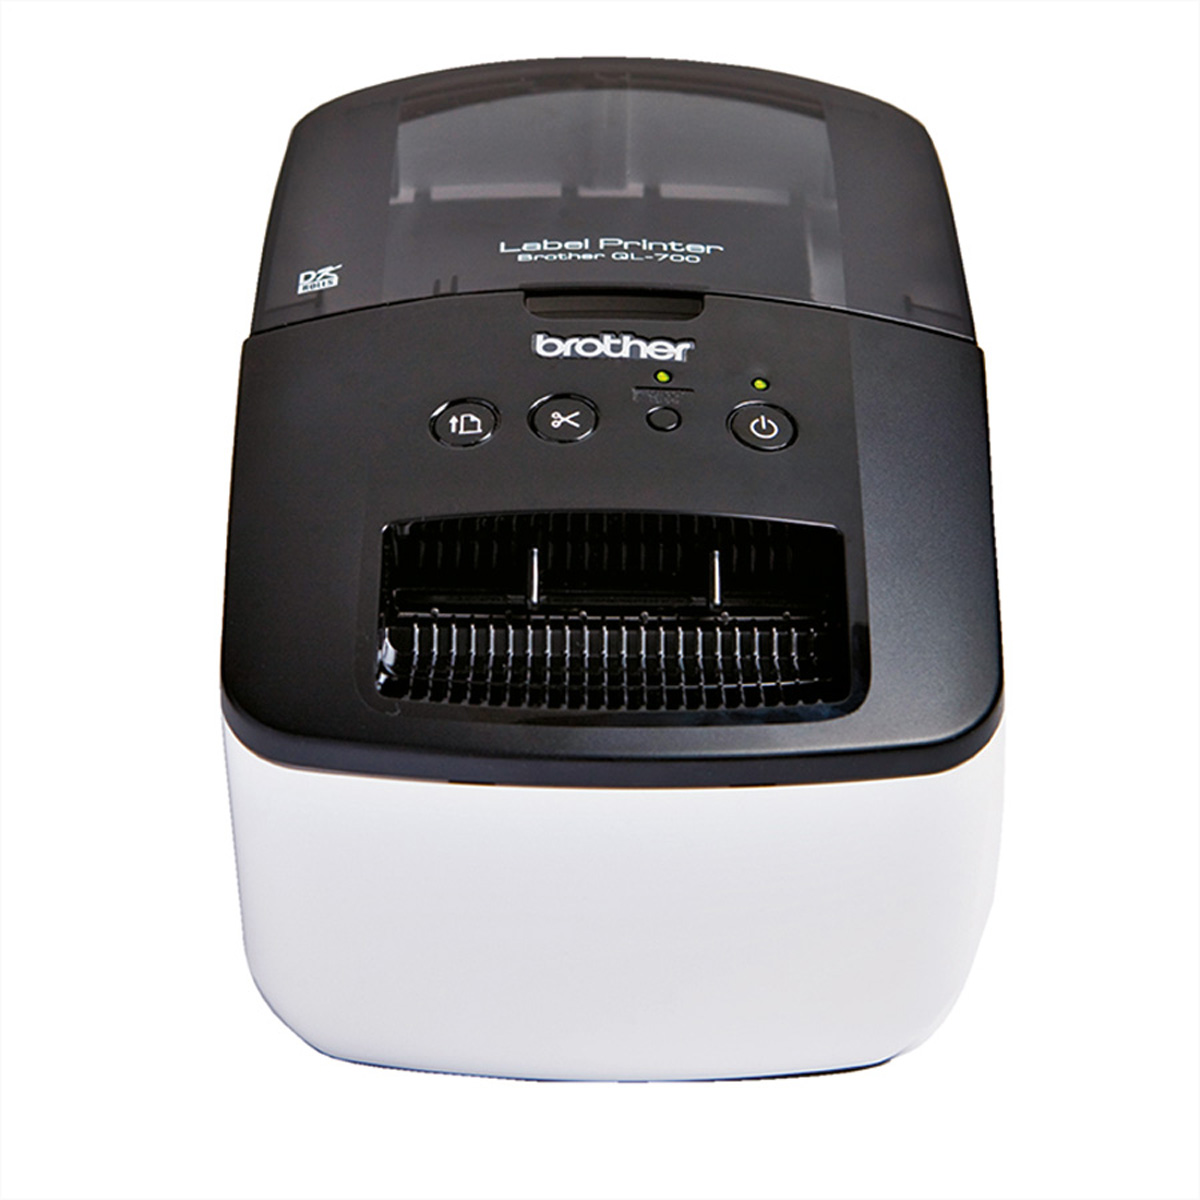 BROTHER P-Touch QL-700 Label Printer - Beschriftungsgerät, "Plug-In and Label"-Funktionalität